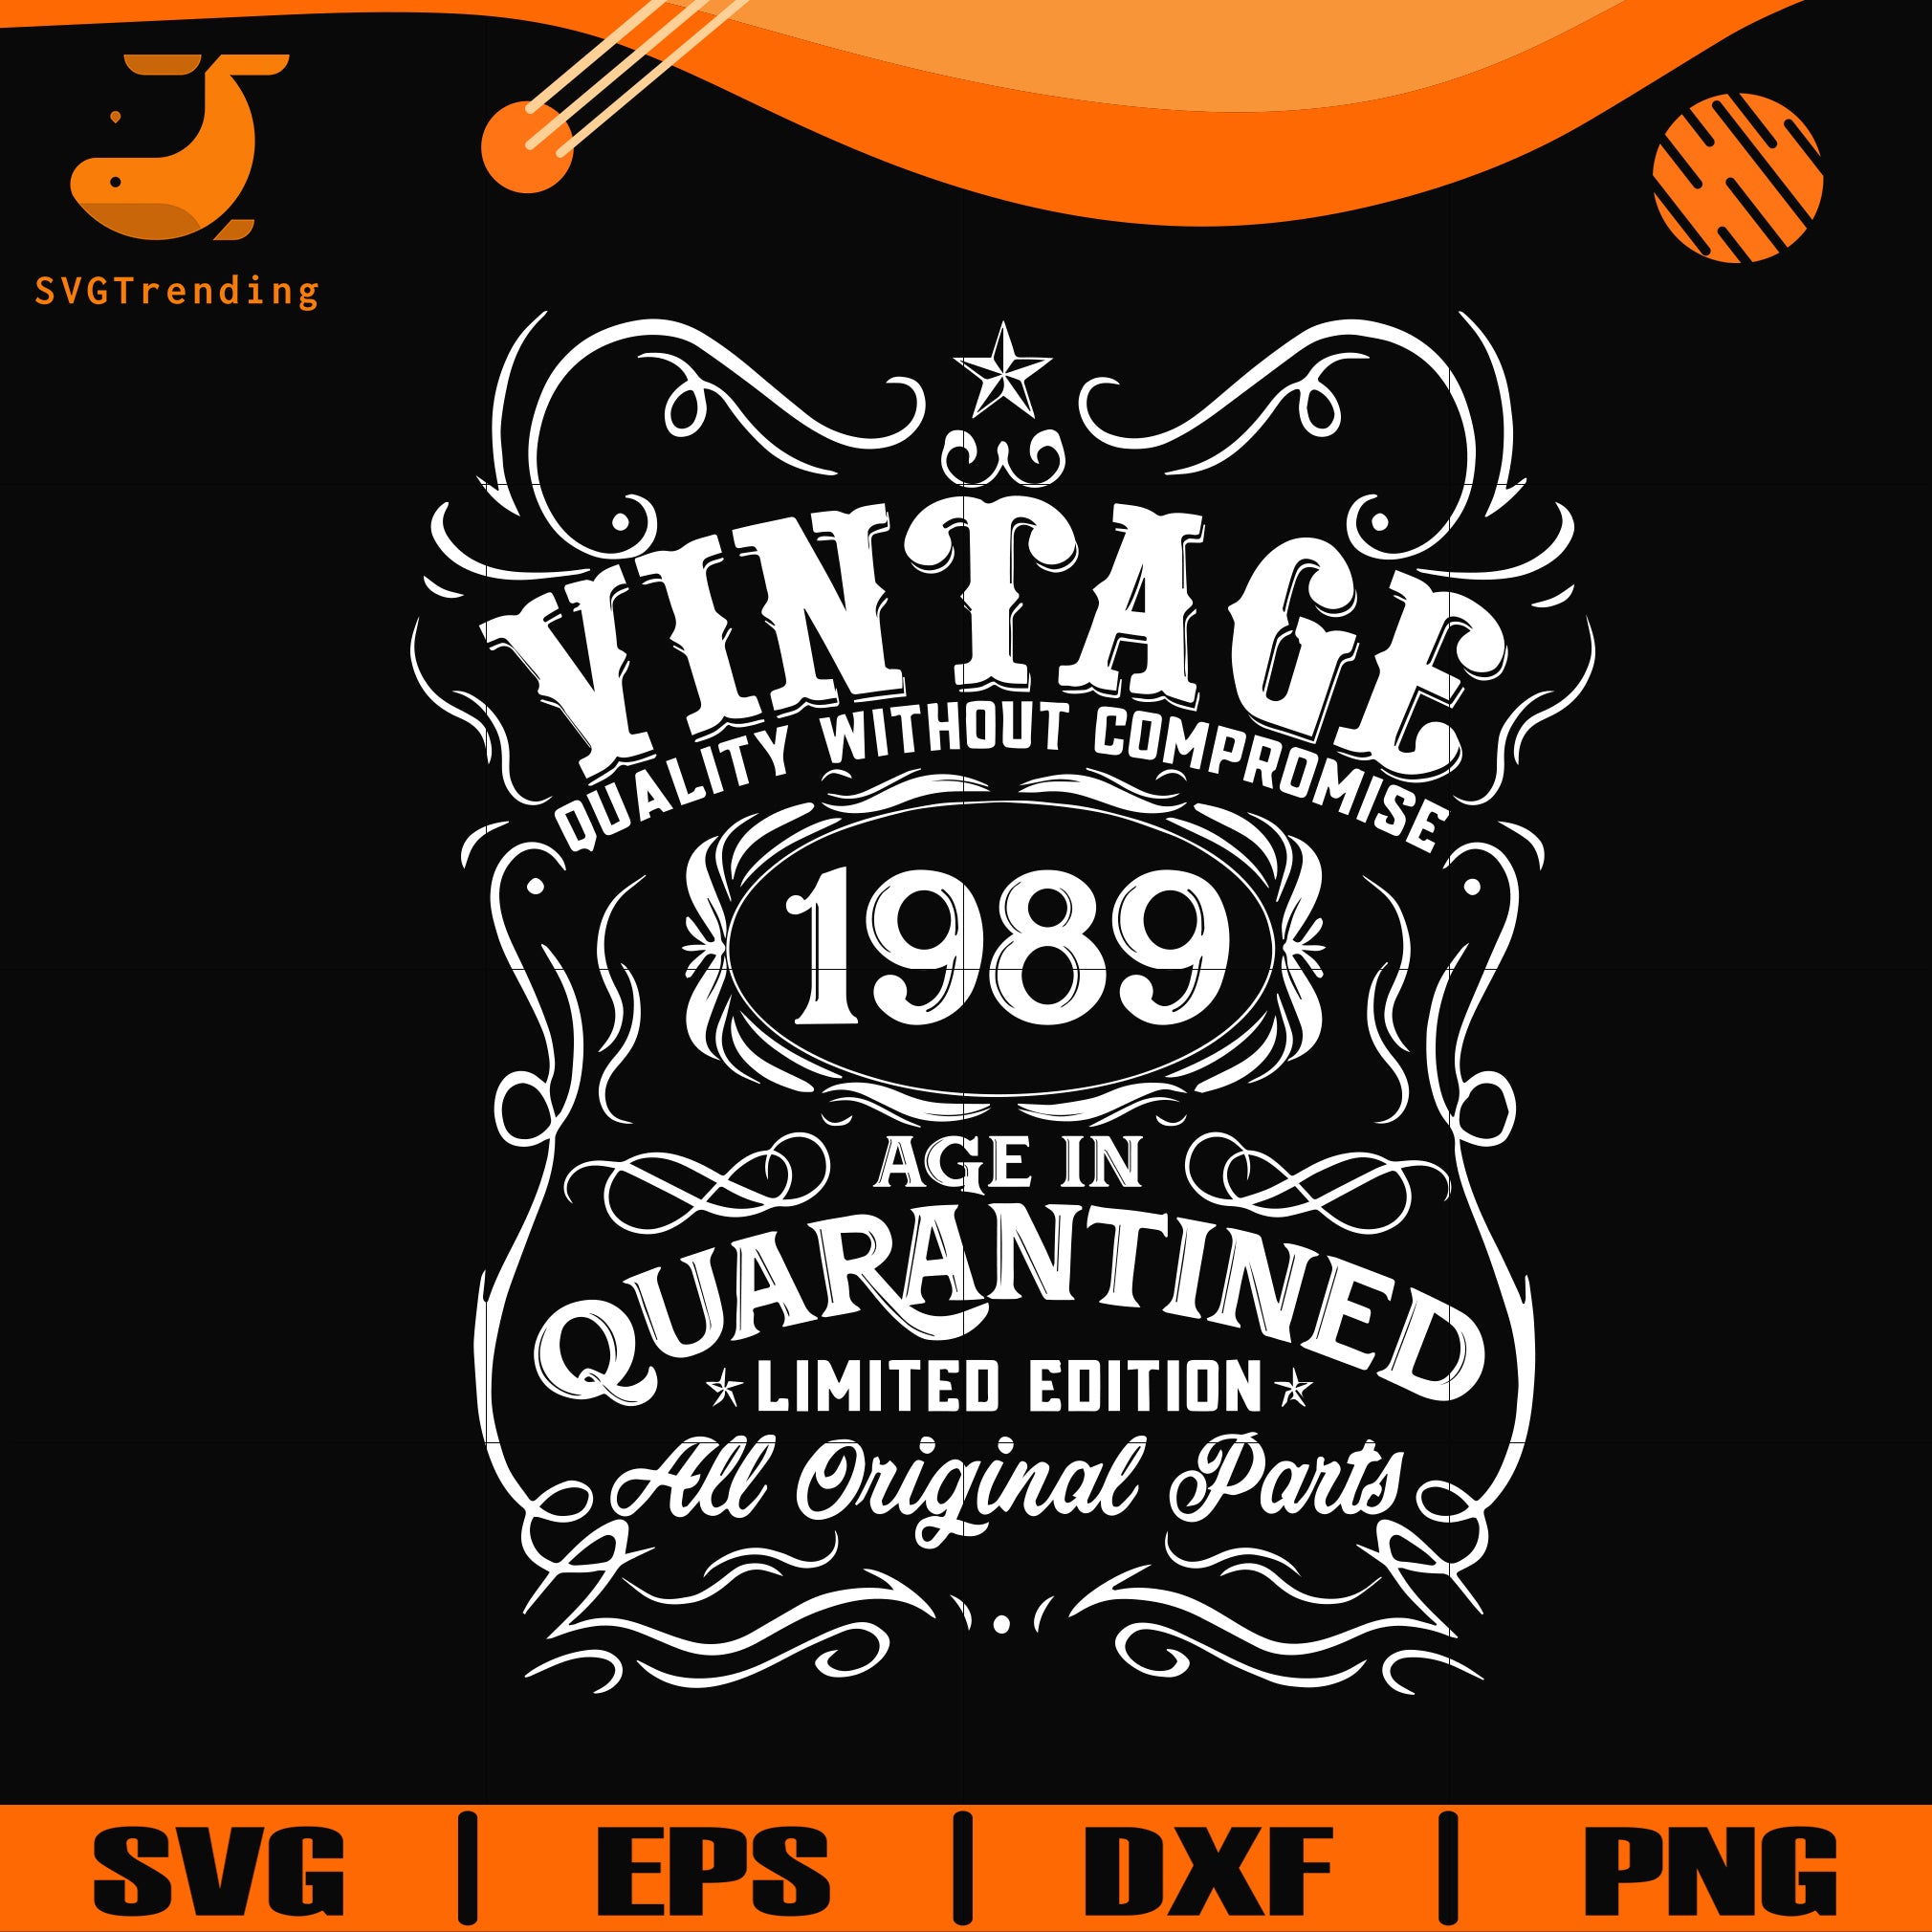 Download Vintage 1989 Age In Quarantined Limited Edition Svg Limited Edition S Svgtrending